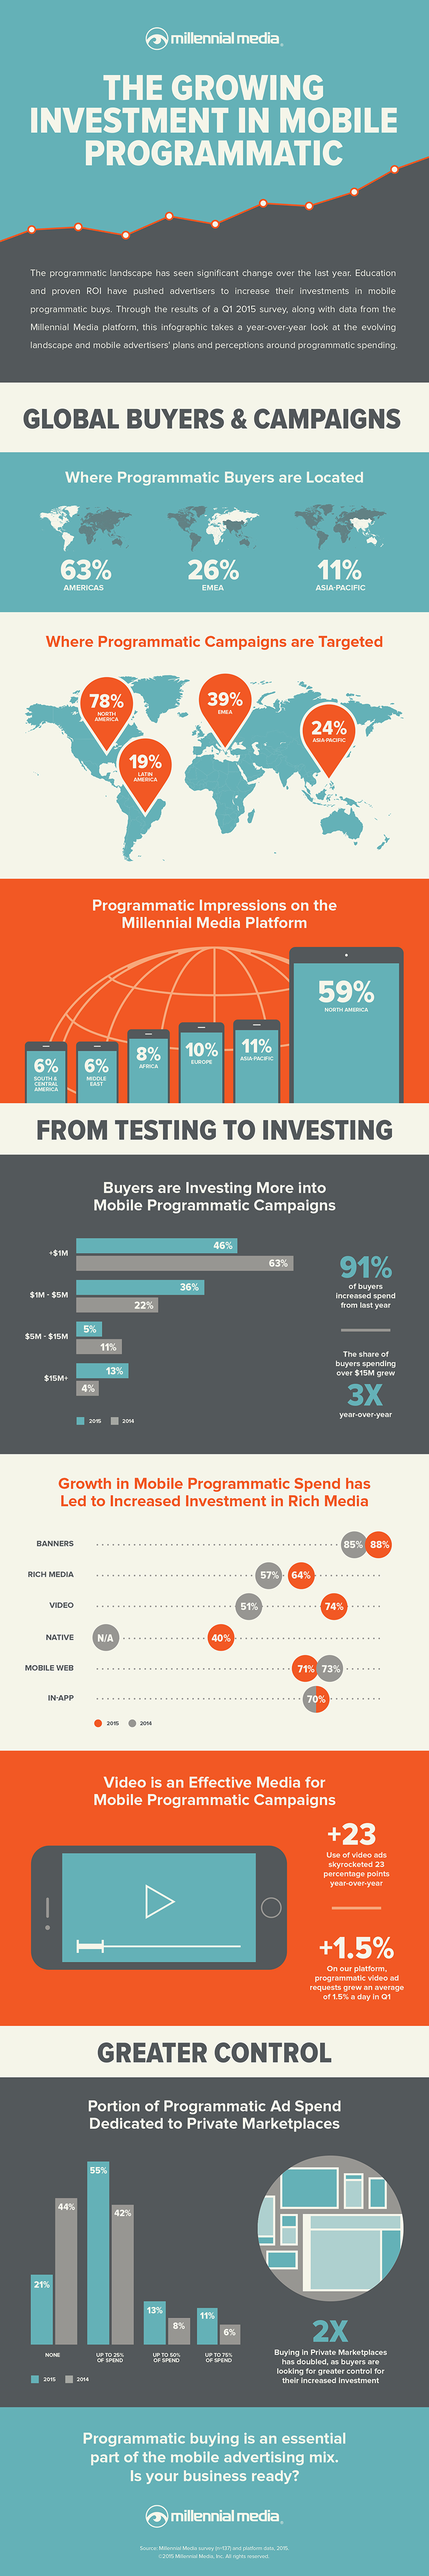 Infographic: The Growing Investment in Mobile Programmatic